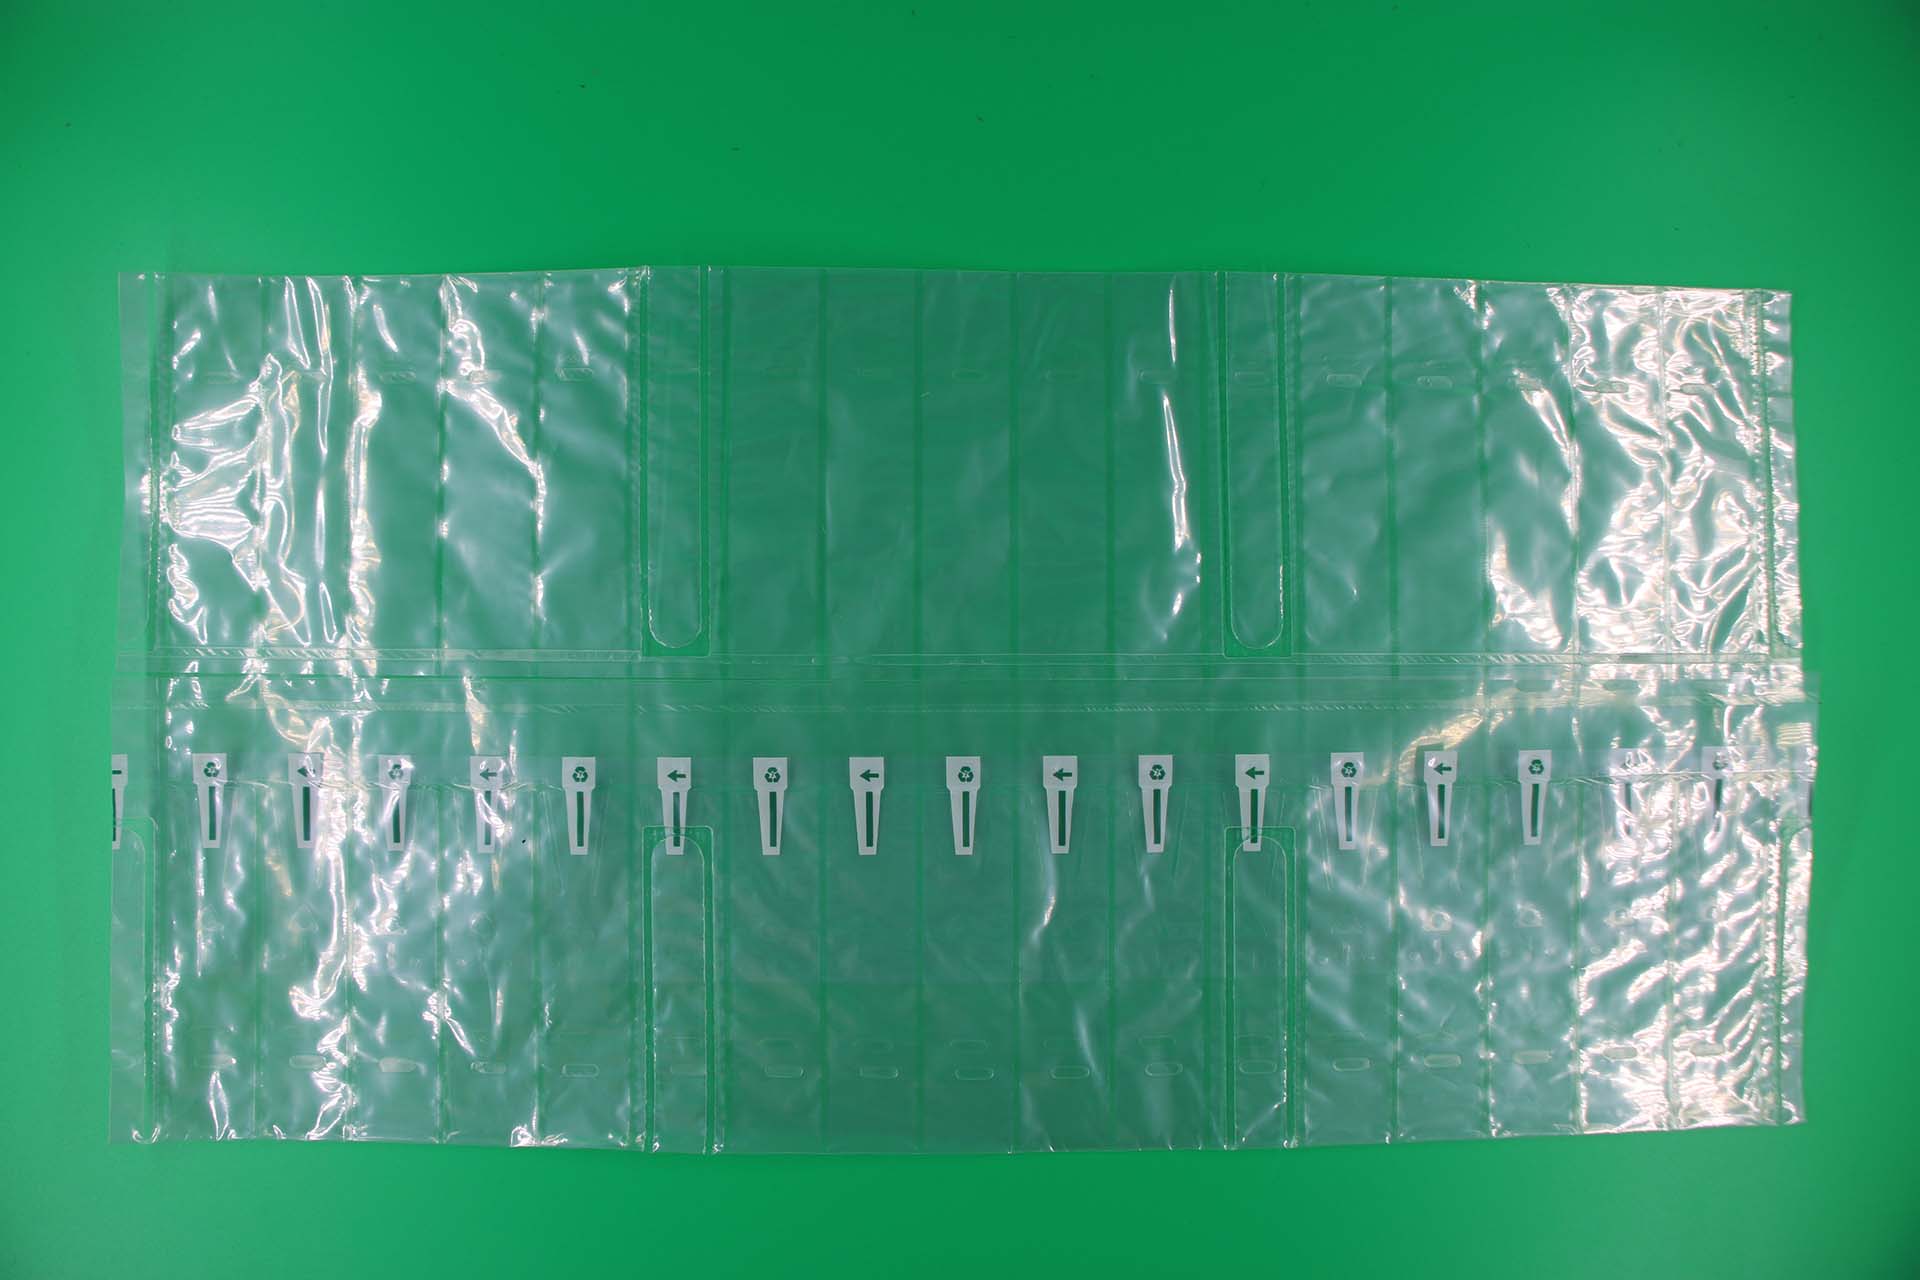 factory-price air filled bags packaging buy now for package Sunshinepack